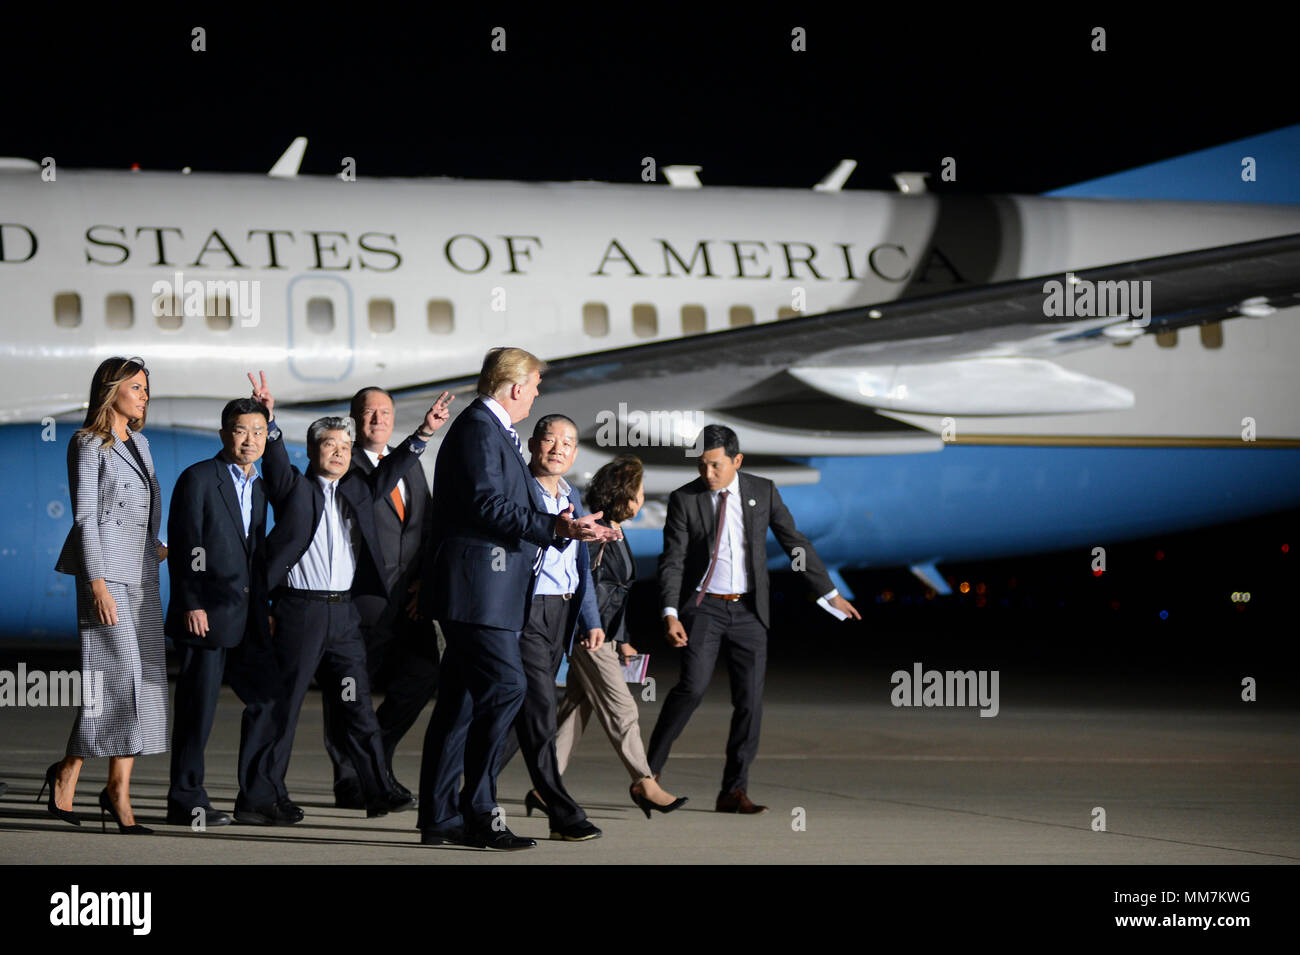 U.S. President Donald Trump and First Lady Melania Trump welcome home three American detainees freed by North Korea on arrival at Joint Base Andrews May 10, 2018 in Clinton, Maryland. The three include Kim Dong-chul, Tony Kim and Kim Hak-song released as a gesture of goodwill ahead of the planned meeting between Trump and North Korean leader Kim Jong-un. Stock Photo